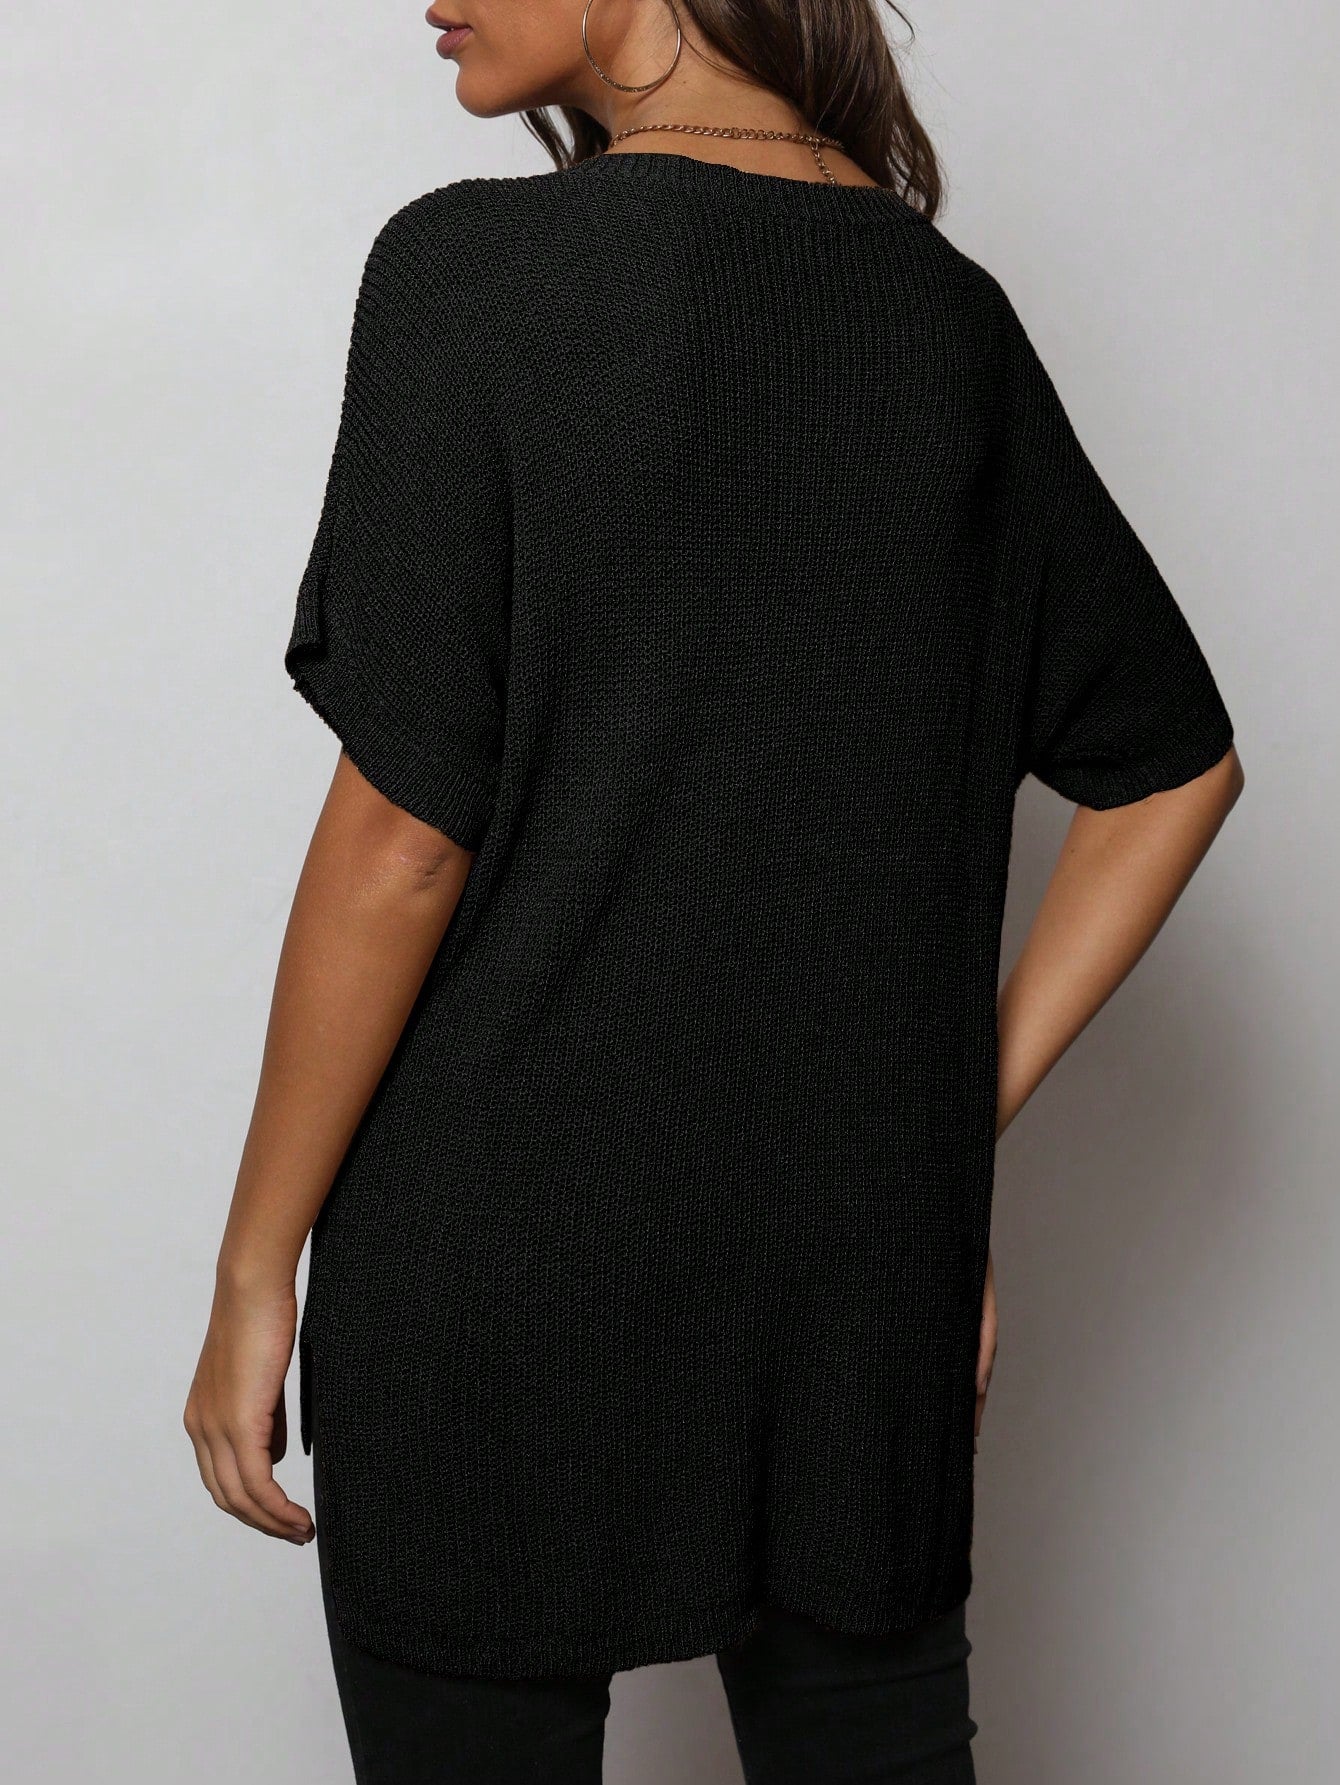 Batwing Sleeve Knit PocketTop: The Perfect Combination of Style and Comfort